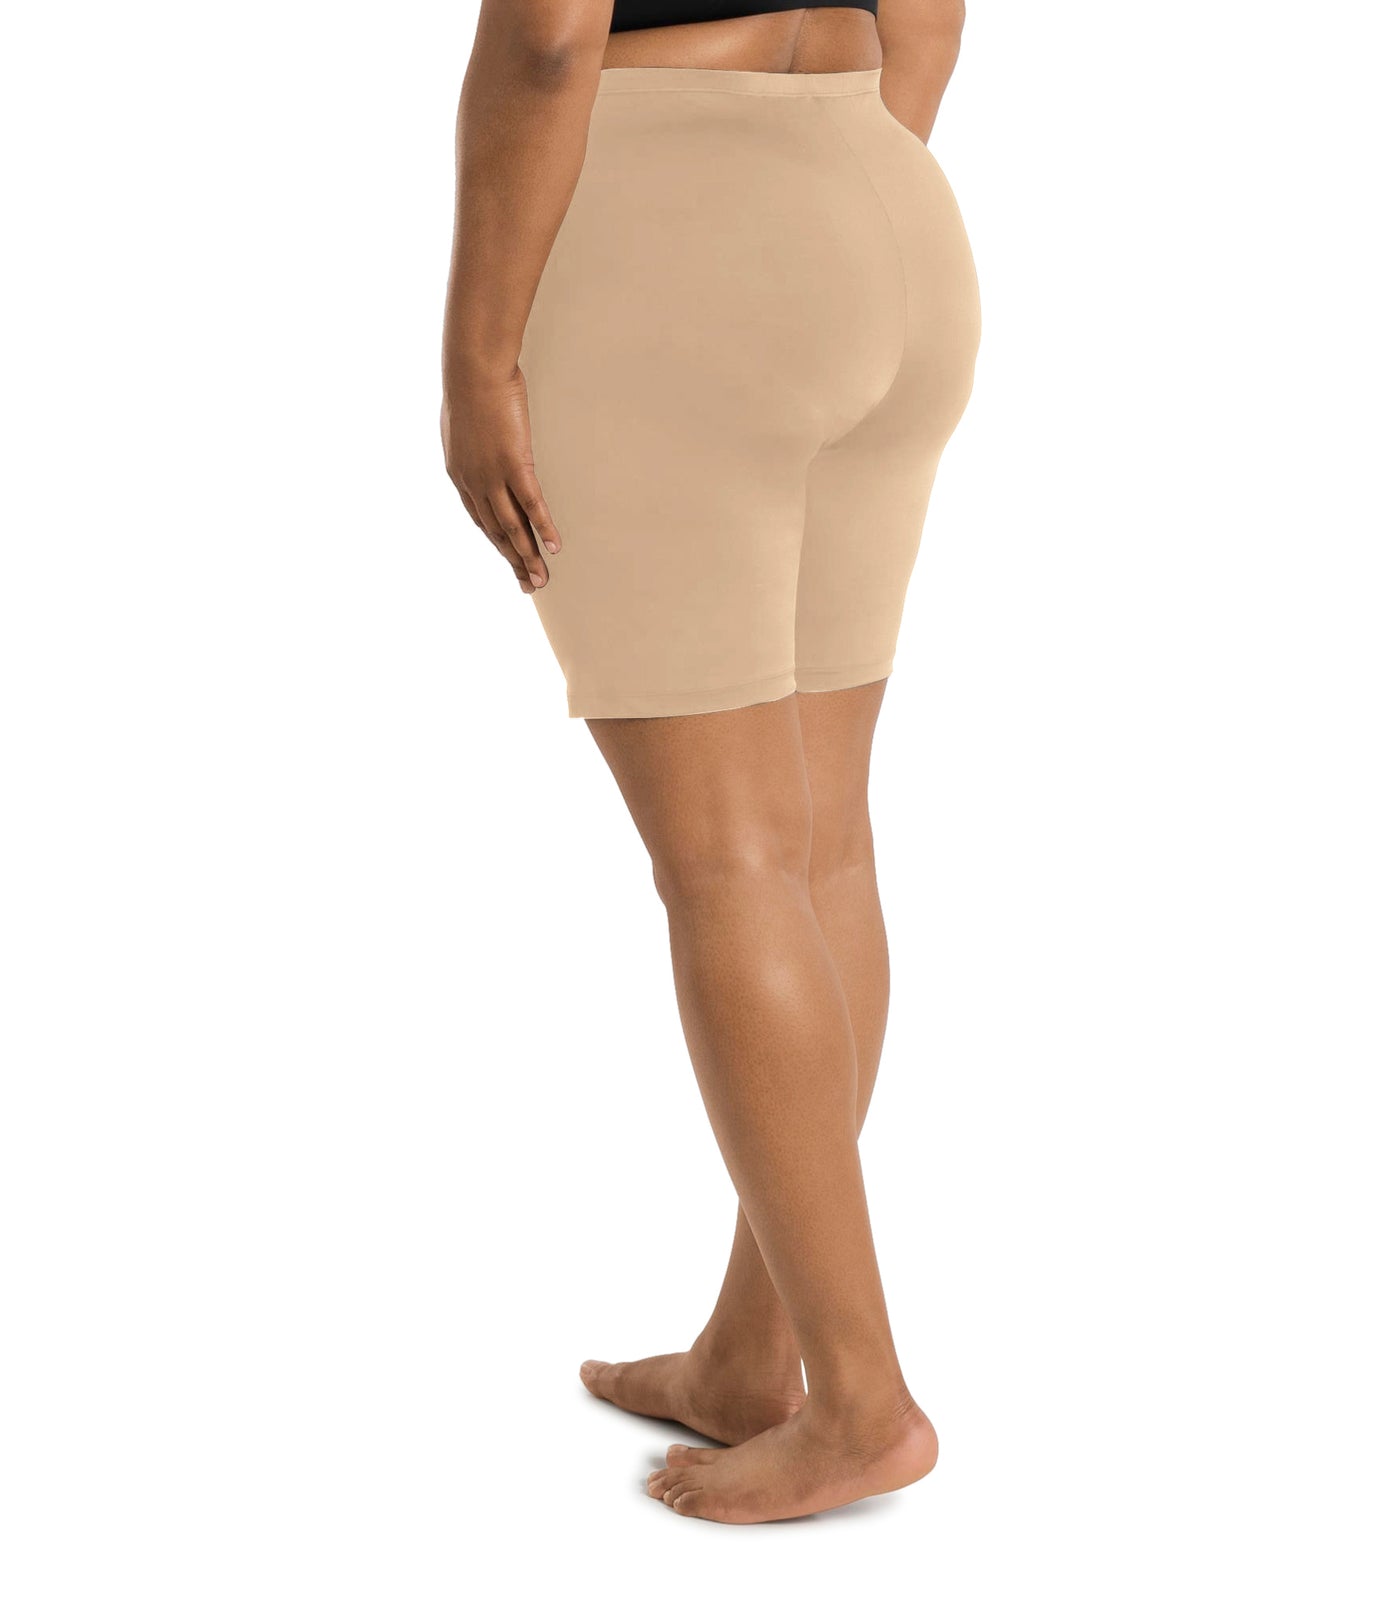 Plus size woman wearing JunoActive's hush full fit boxer in color ecru. Model is facing back with hands to her side.